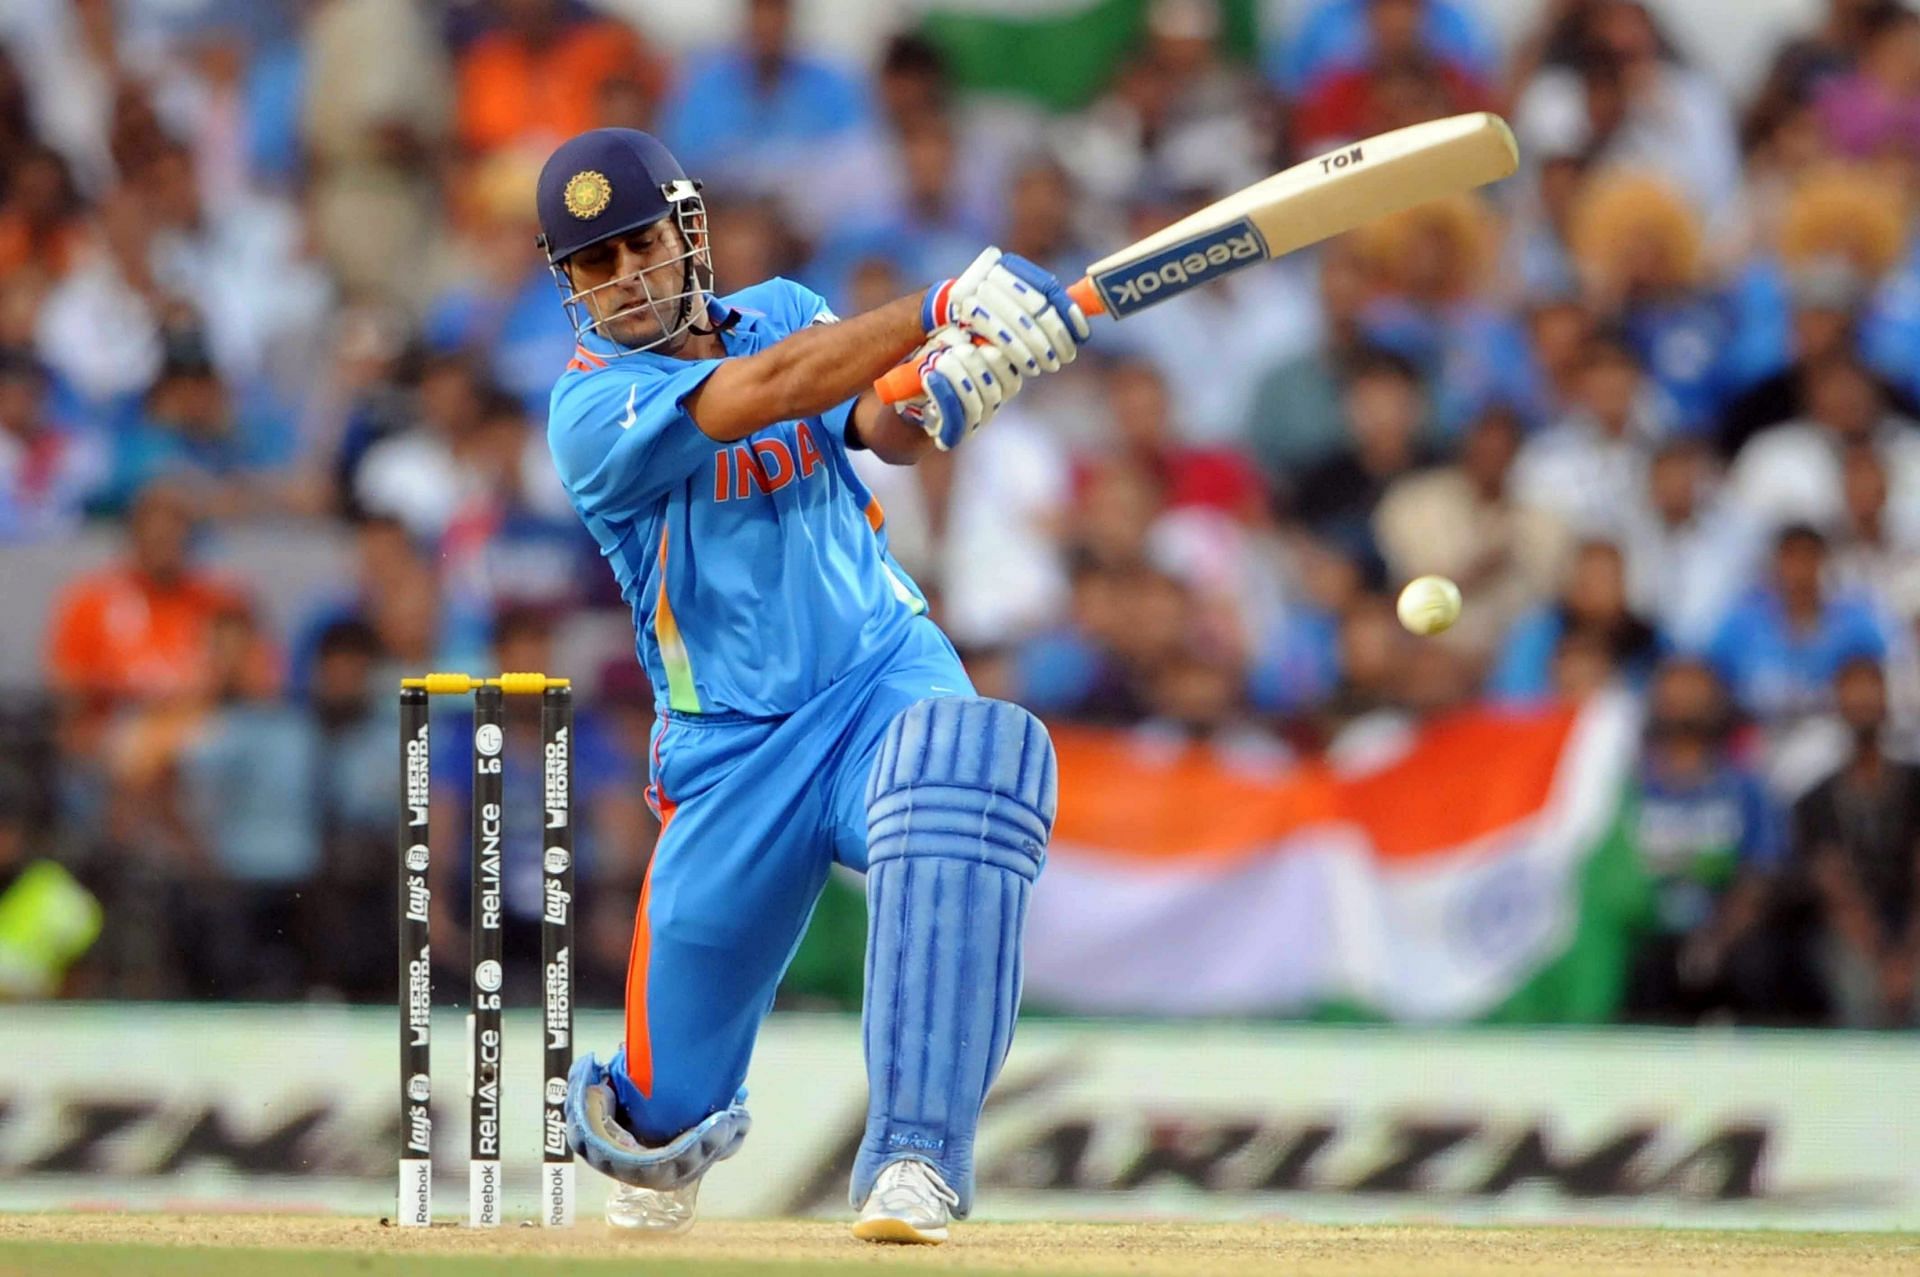 MS Dhoni remained unbeaten in 42 of his 85 T20I innings.